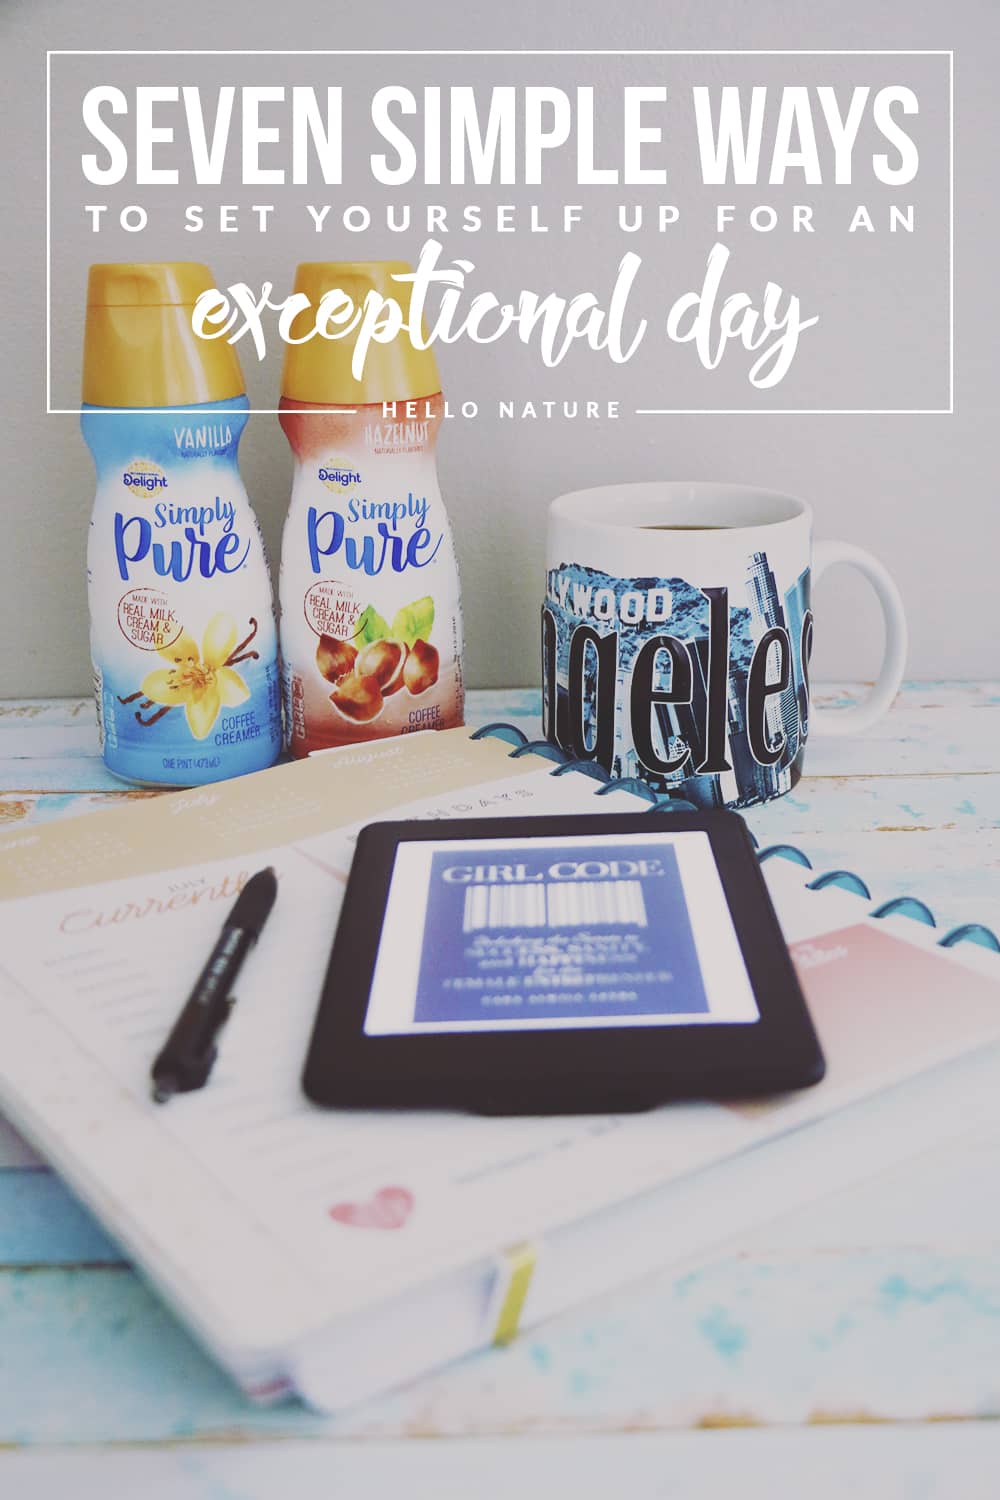 Looking to have better days? These Seven Simple Ways to Set Yourself Up for an Exceptional Day are just what you need to start the day off right!